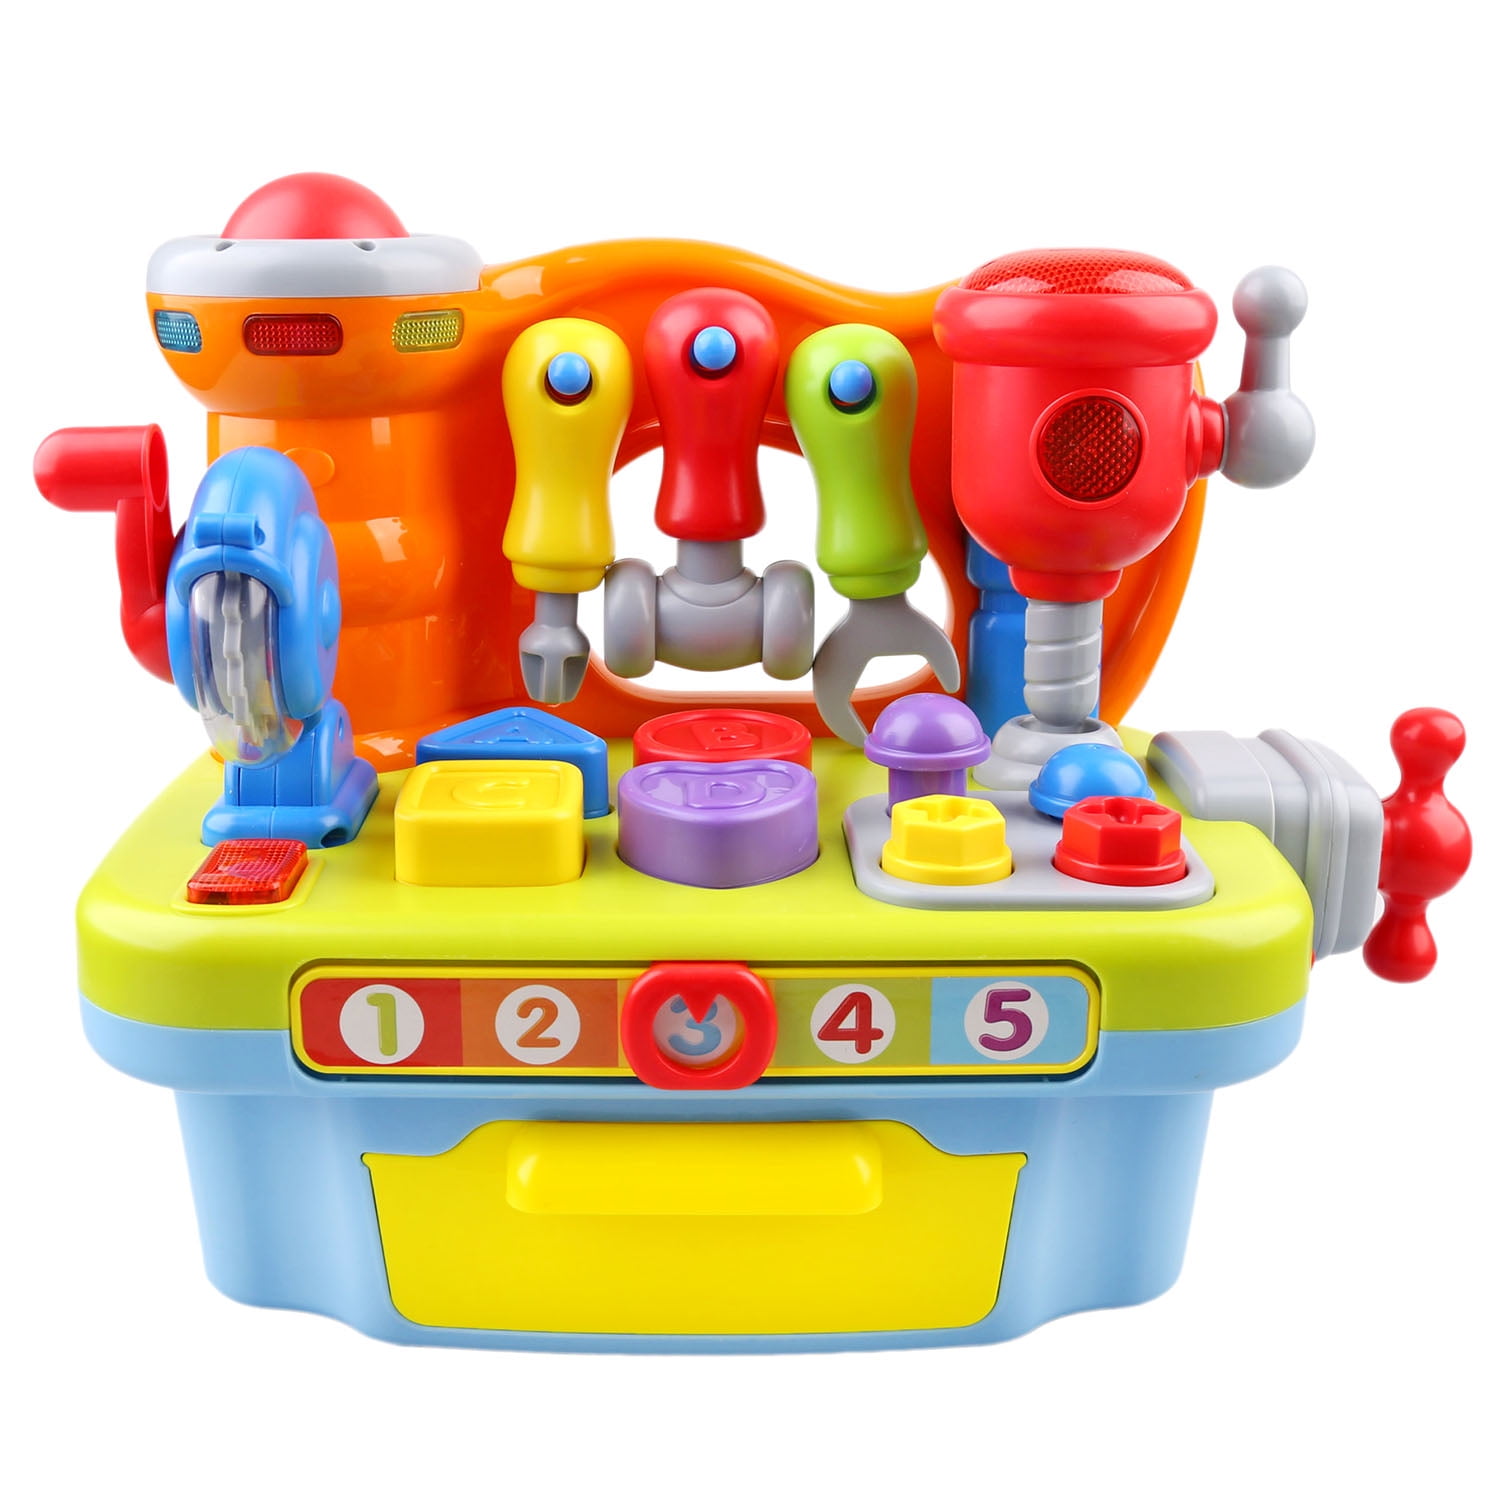 Details about   Scoop Play Digger Push Activated Light Up Role Play Pieces Learn Colors Numbers 